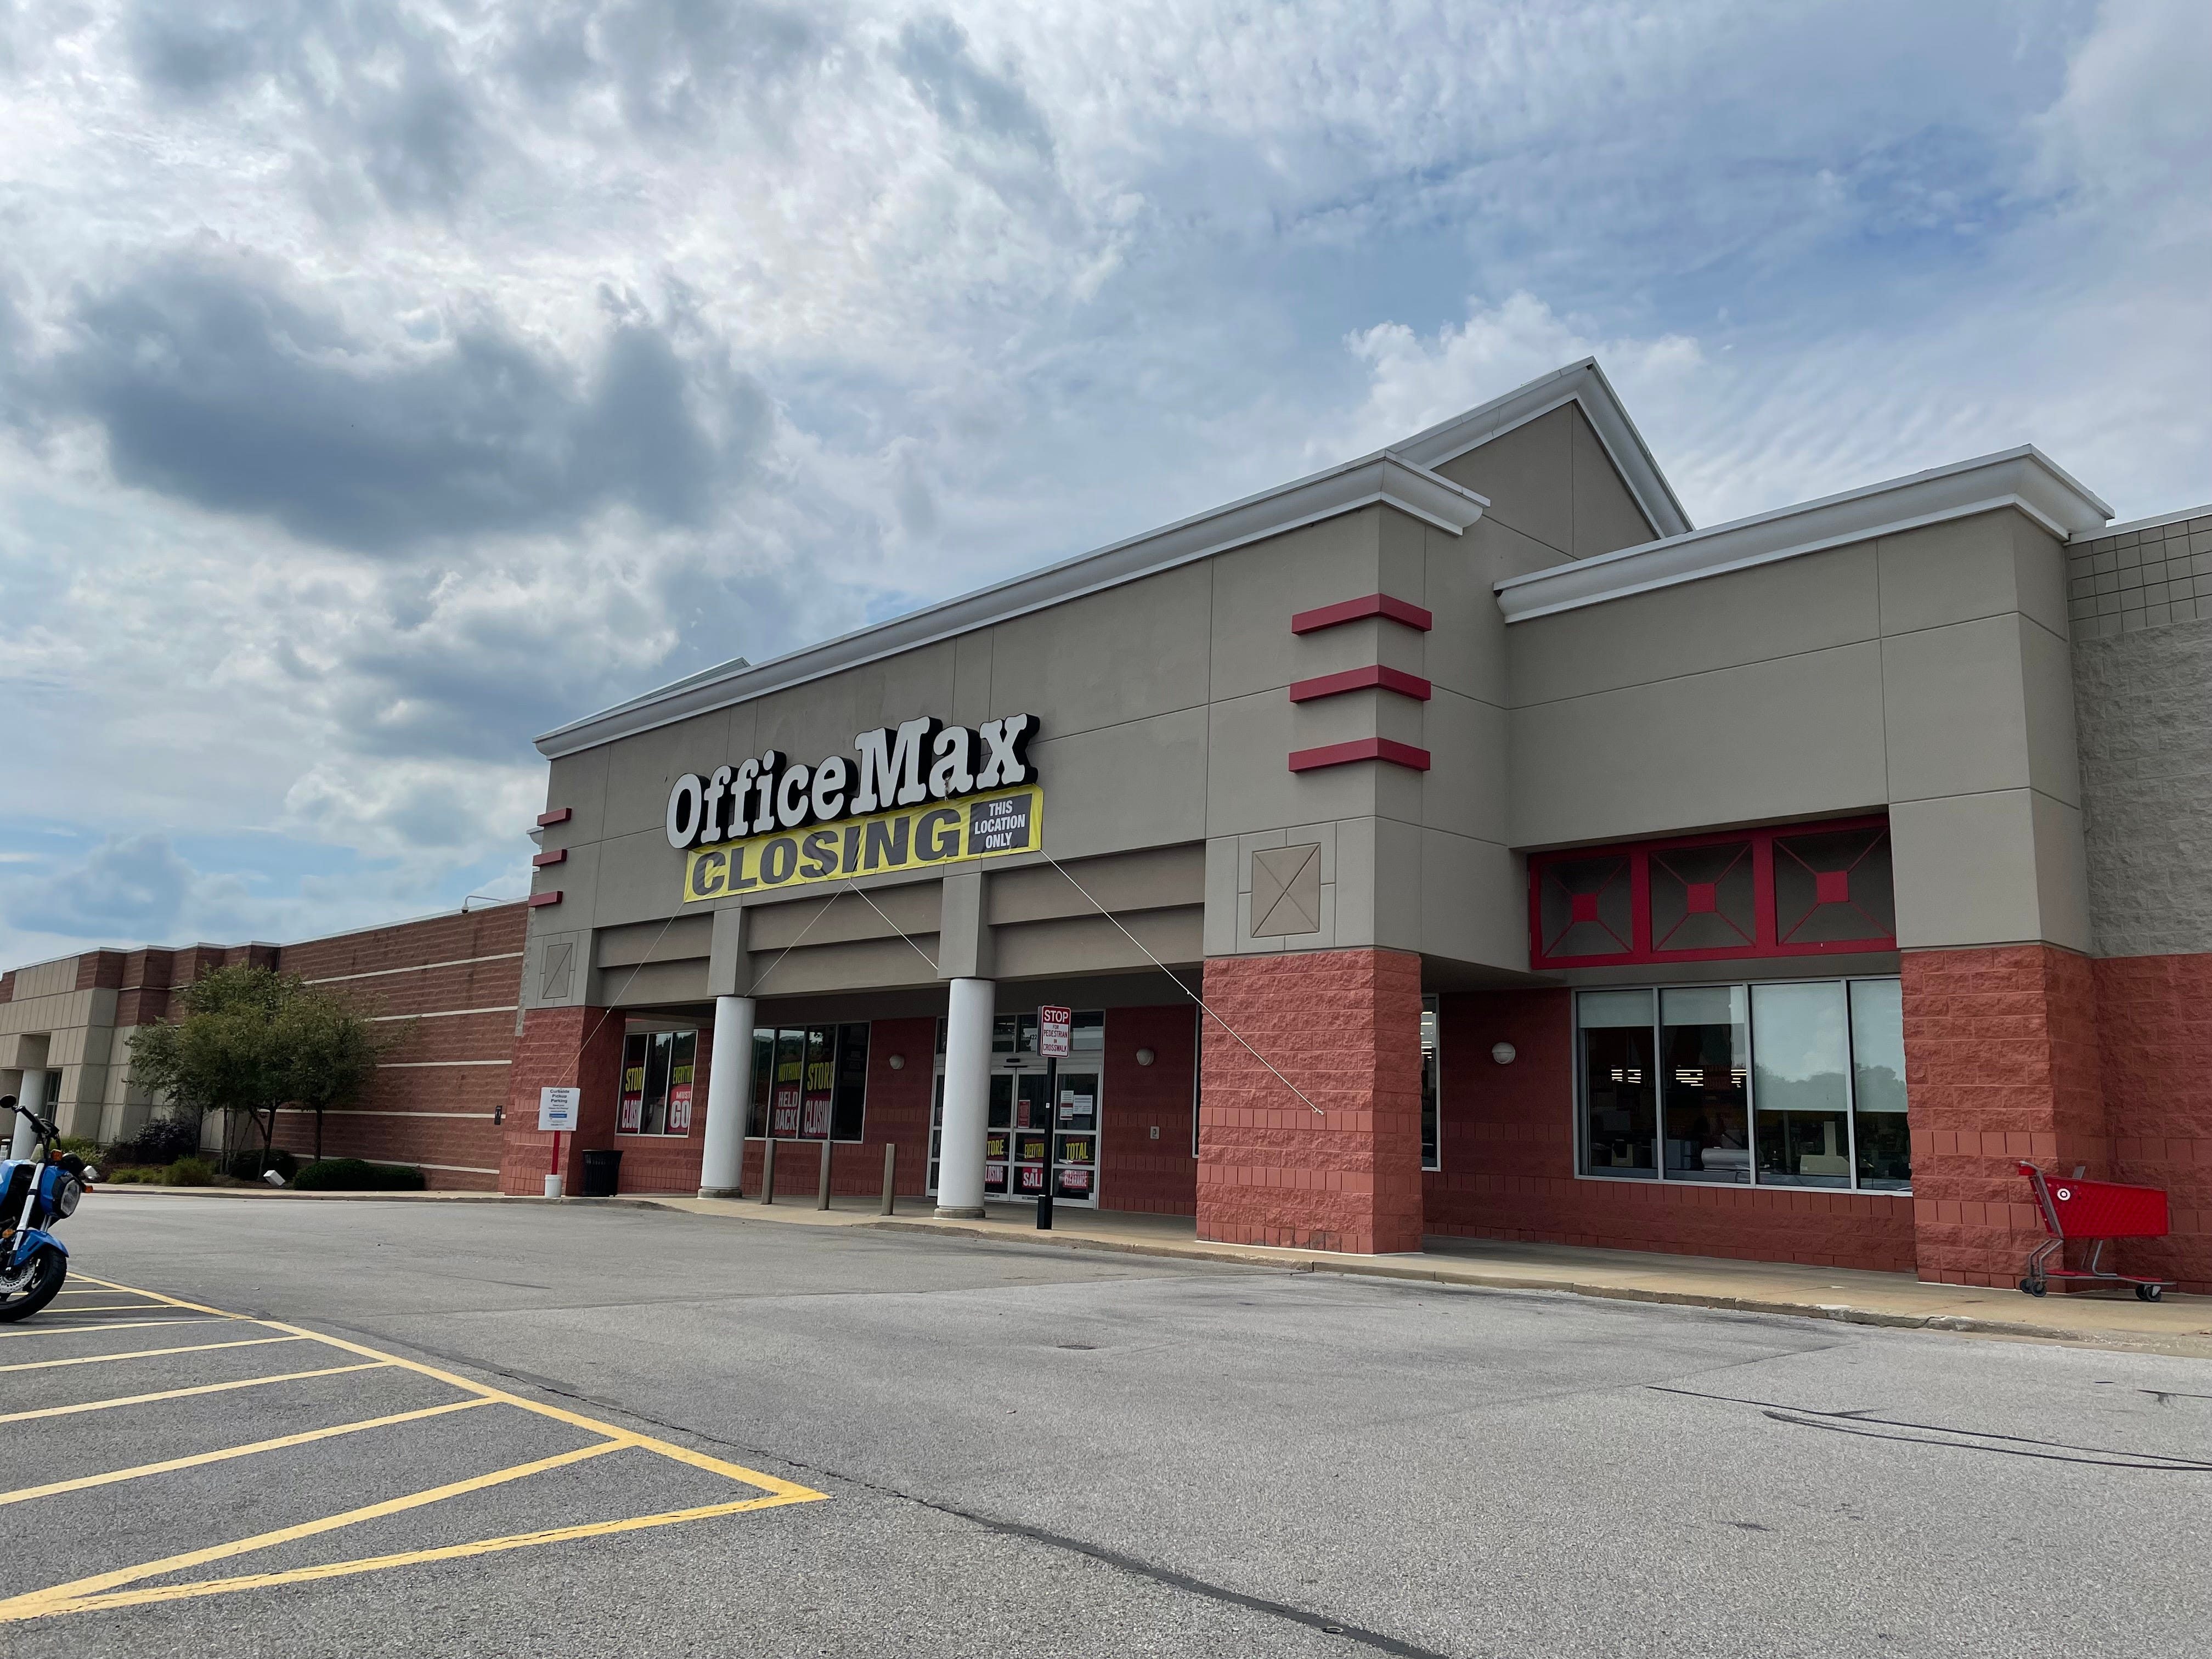 OfficeMax closing two of its four stores in Akron area